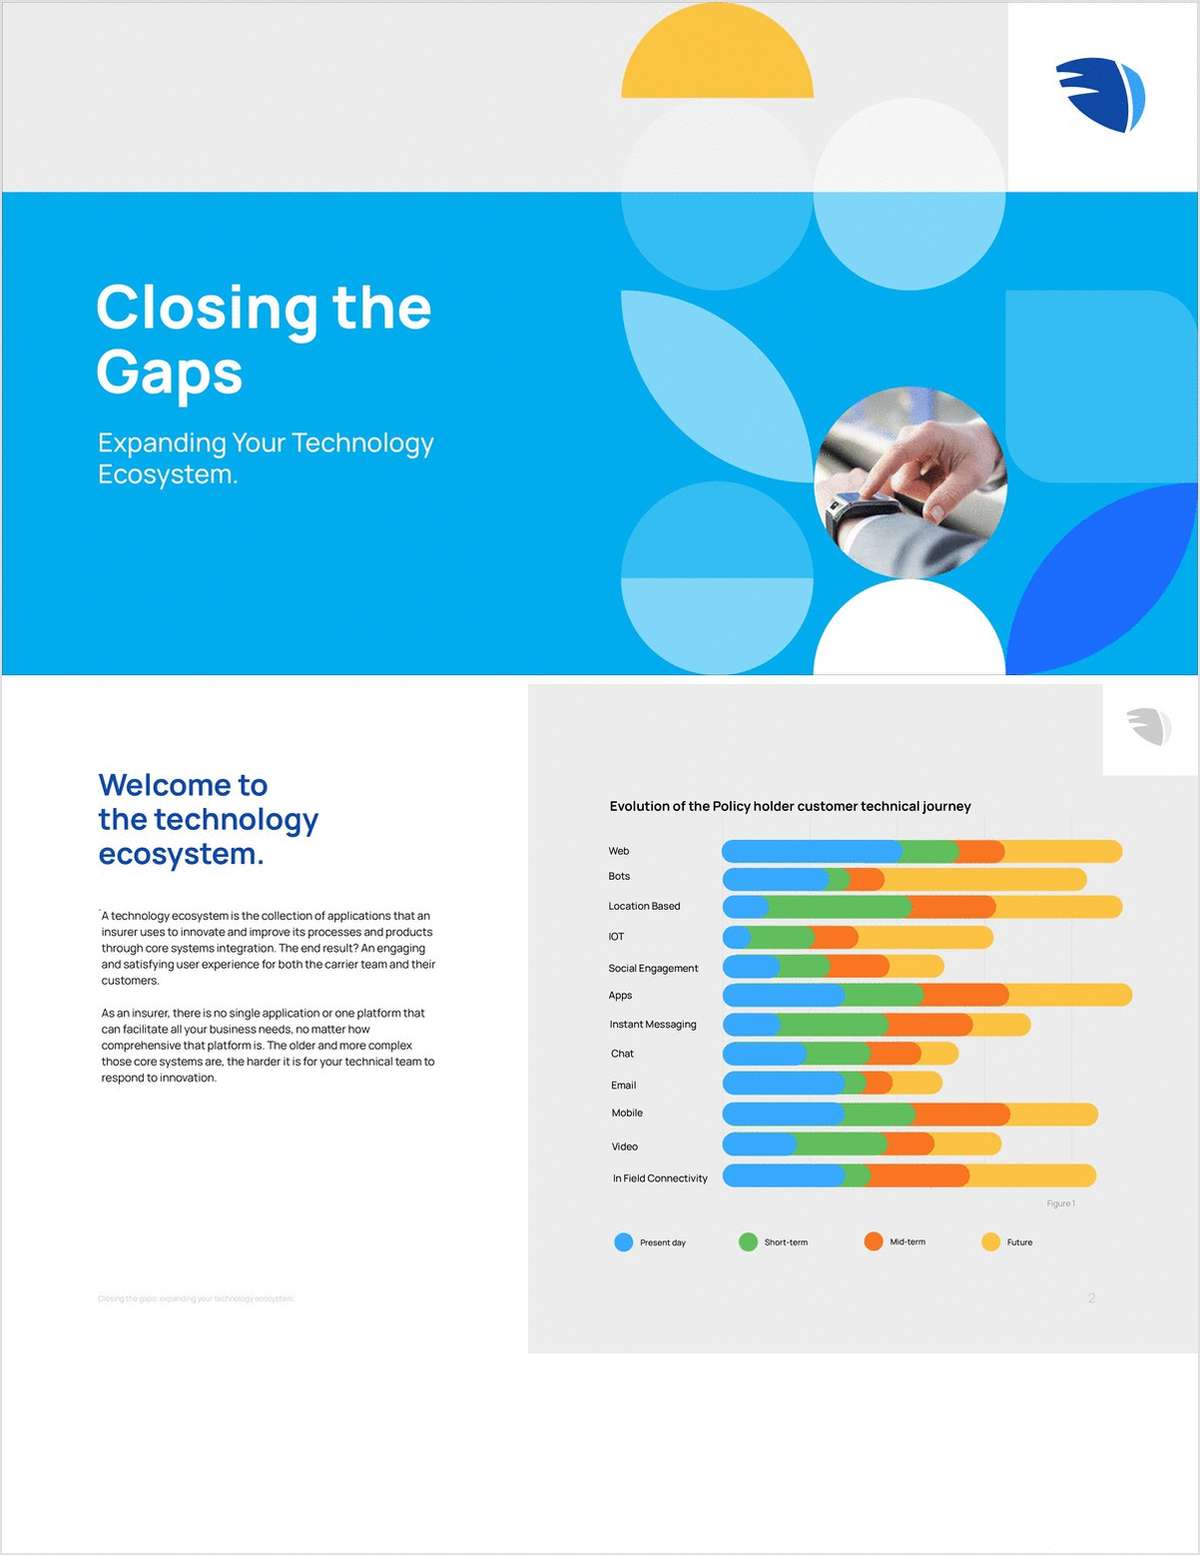 Closing the Gaps: Expanding Your Technology Ecosystem